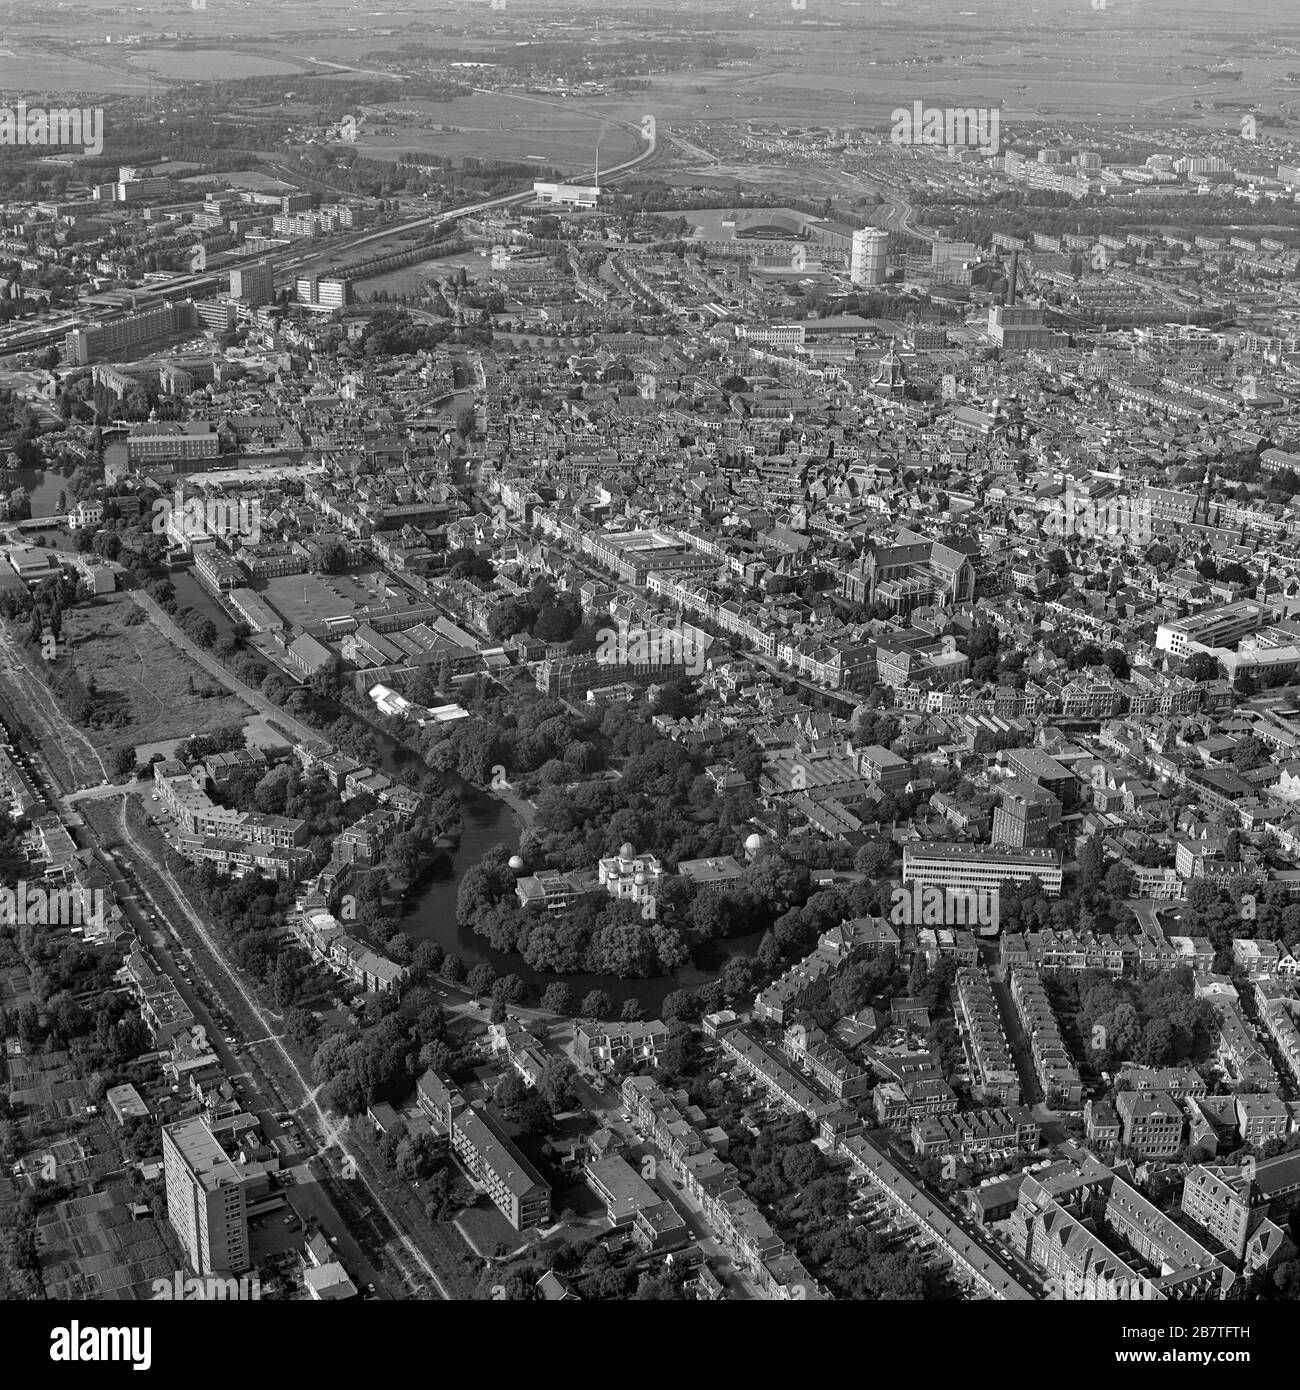 Leiden, Holland, July 17 - 1977: Historical black and white aerial photo from the Leiden Observatory, Sterrewacht Leiden, the astronomical institute o Stock Photo